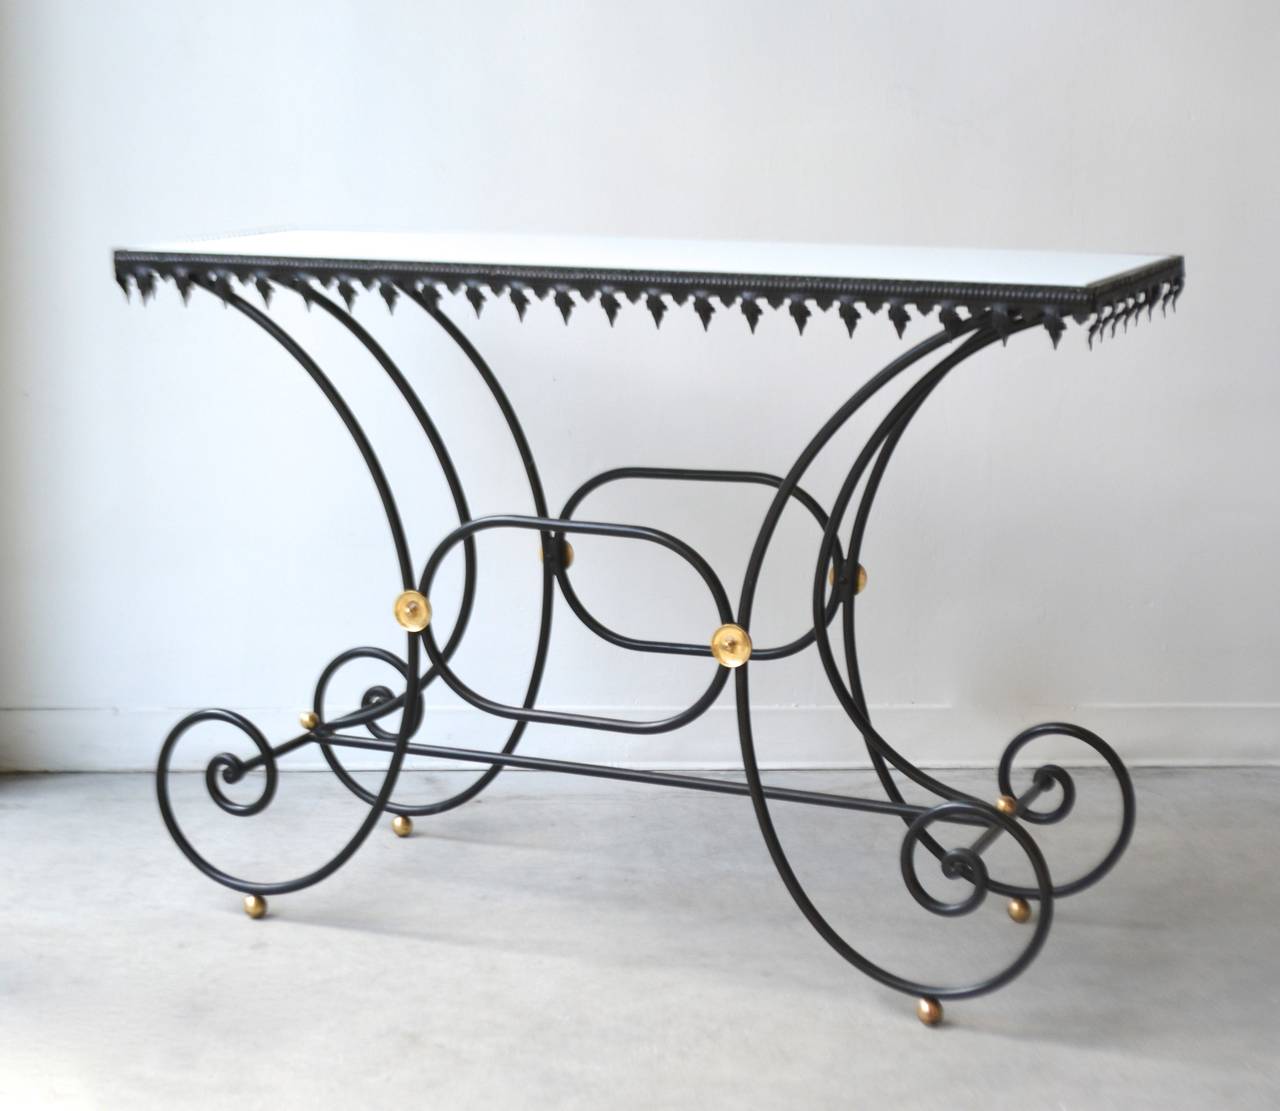 Stunning Hollywood Regency style wrought iron and white milk glass French Baker's Table, c. 1950s. Highlighted with metal embellishments and brass accents.
Overall dimensions:
34.5